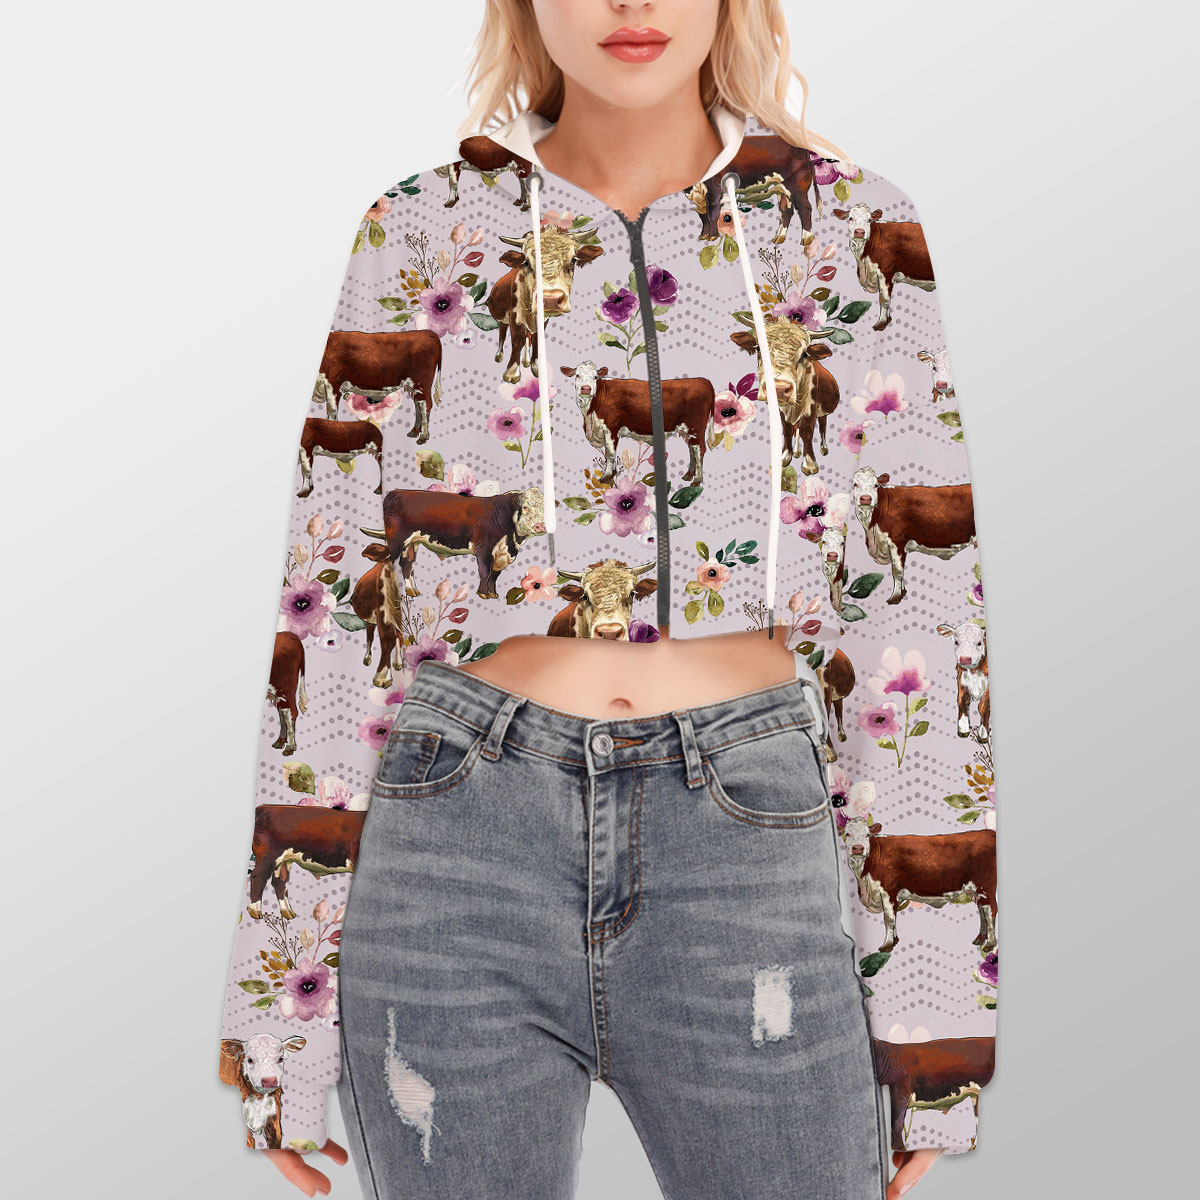 Hereford Autumn Amethyst Boho Floral Pattern Hoodie With Zipper Closure